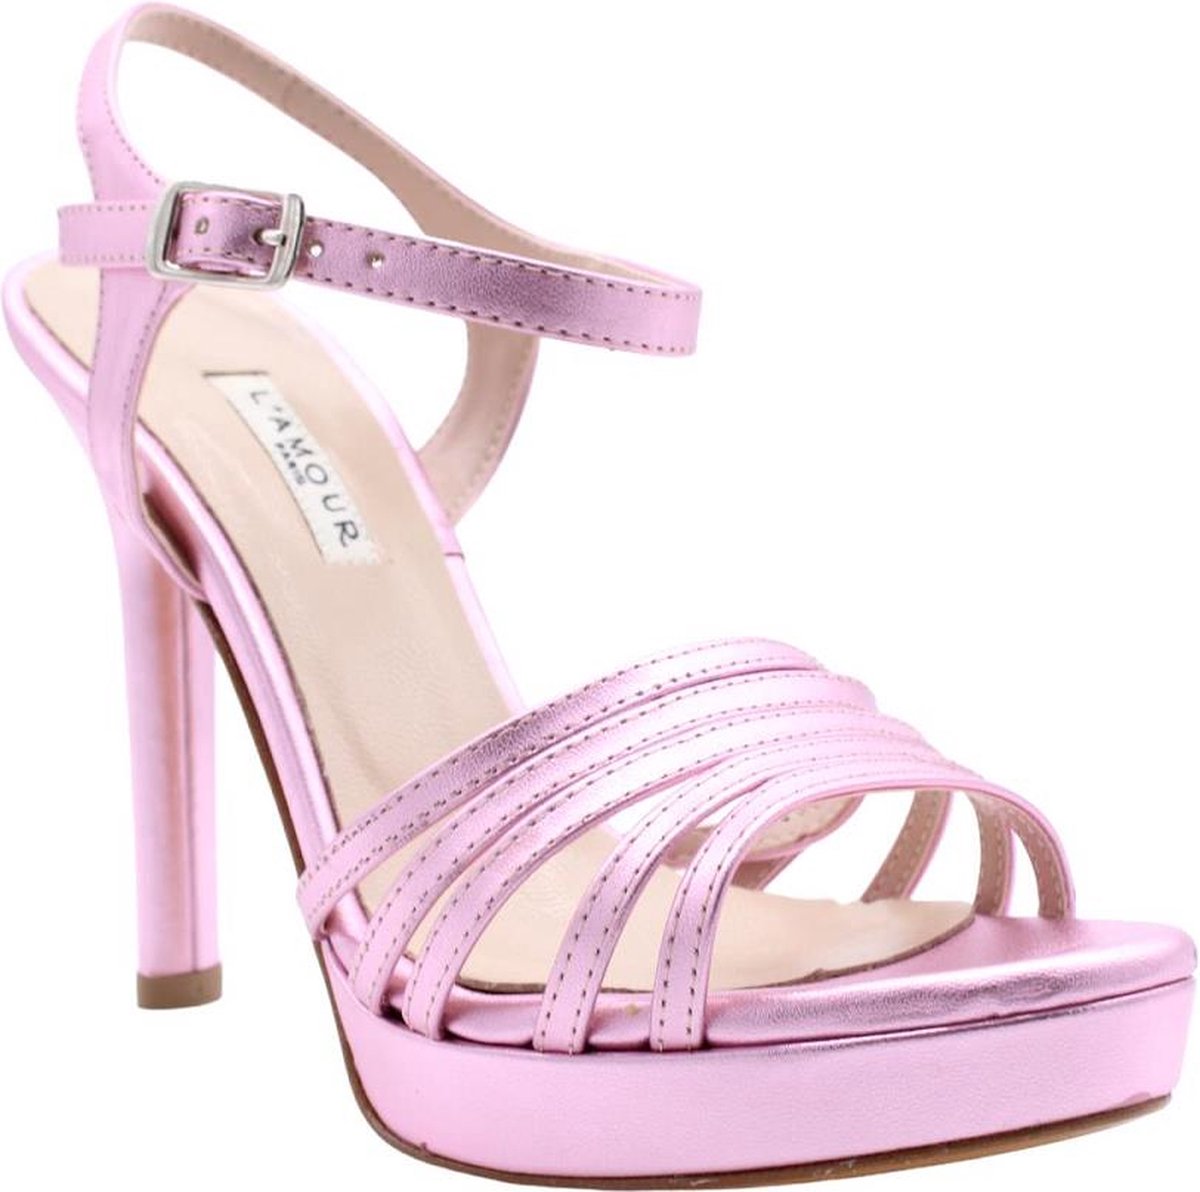 L'amour Sandaal Pink 39